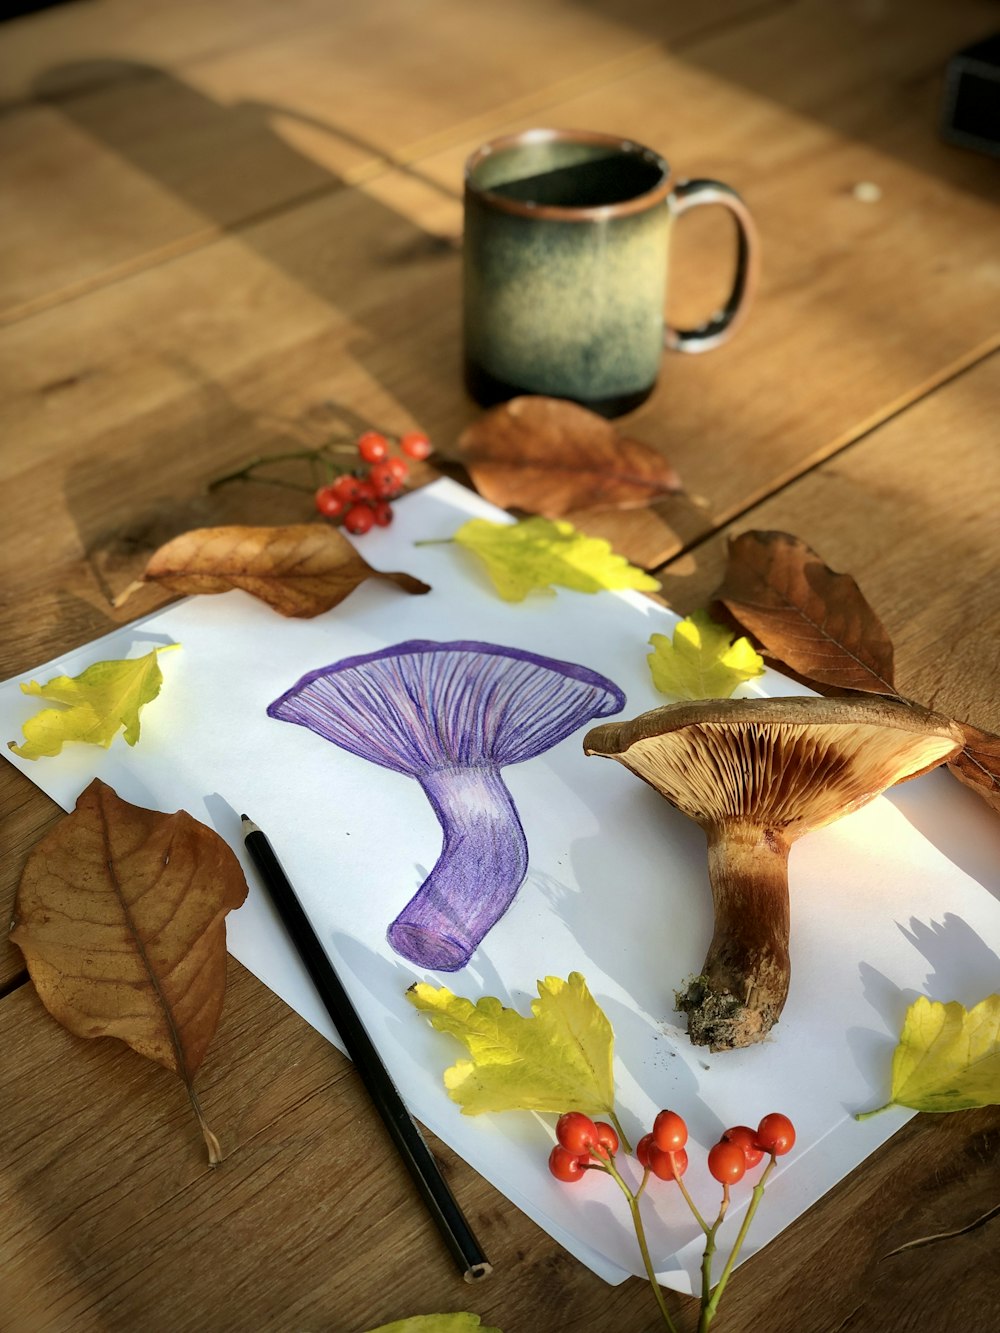 a picture of a mushroom on a piece of paper